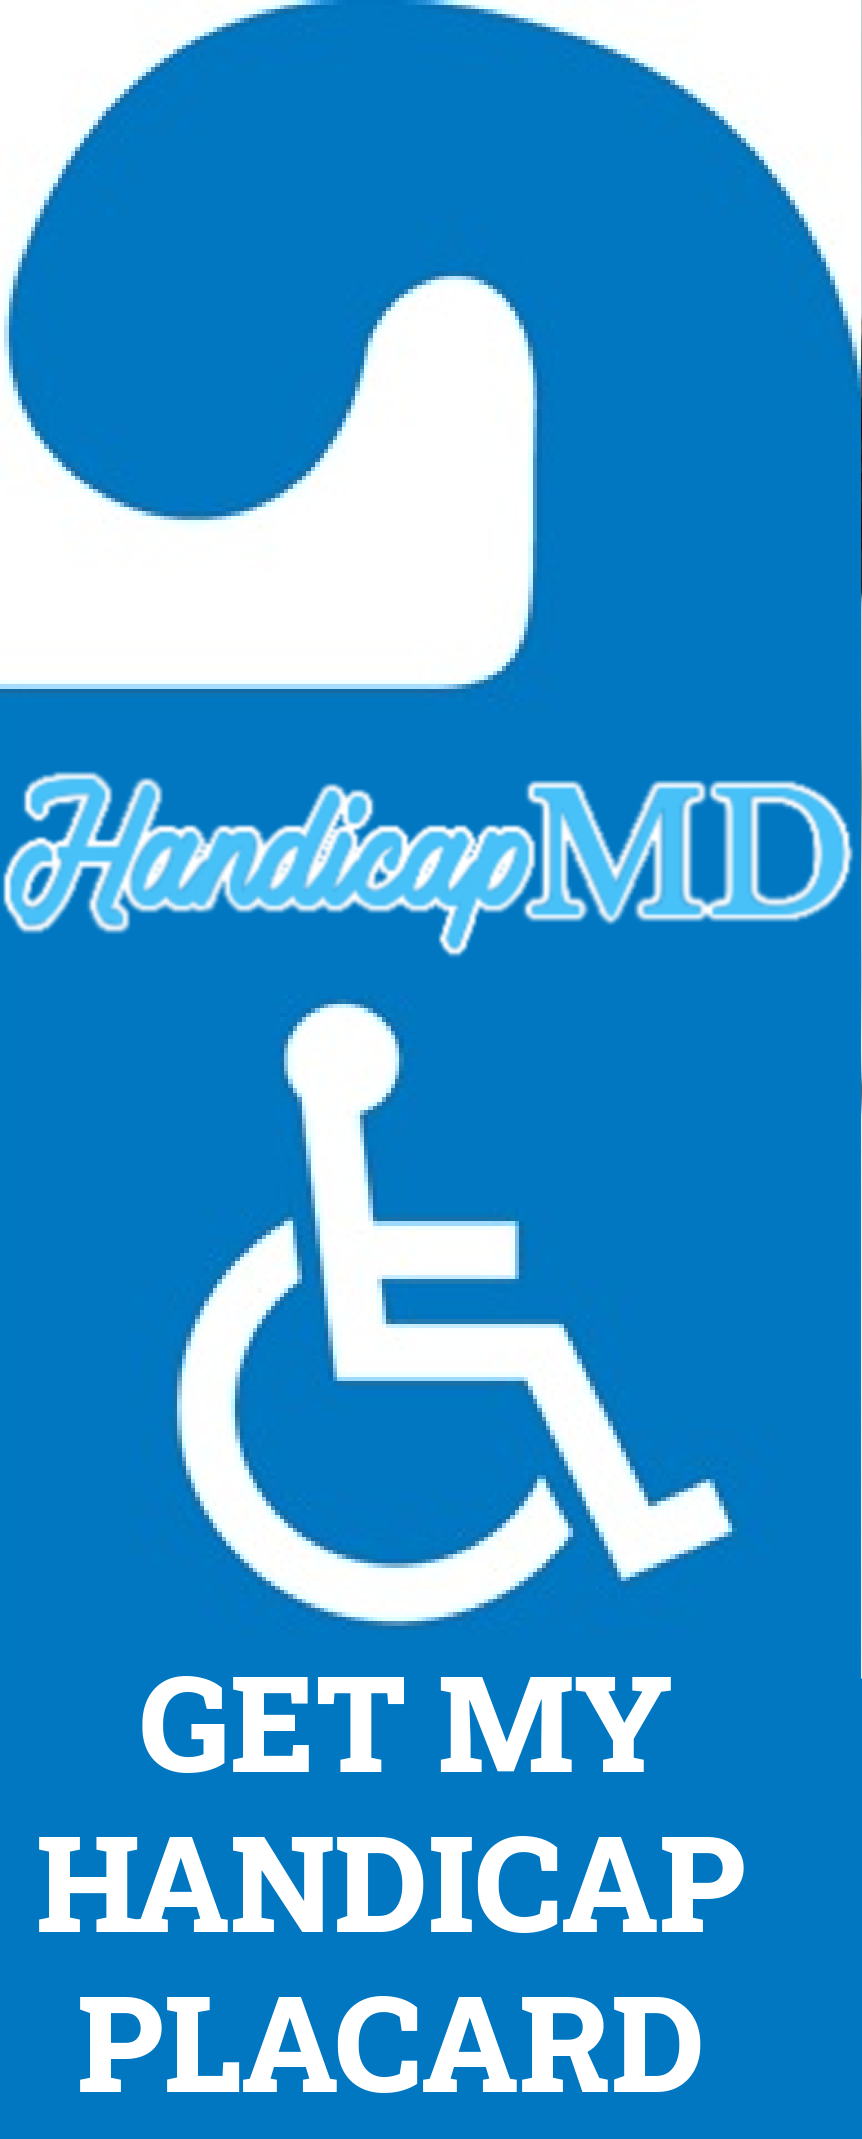 5 Mistakes to Avoid When Applying for a San Diego Disabled Parking Permit